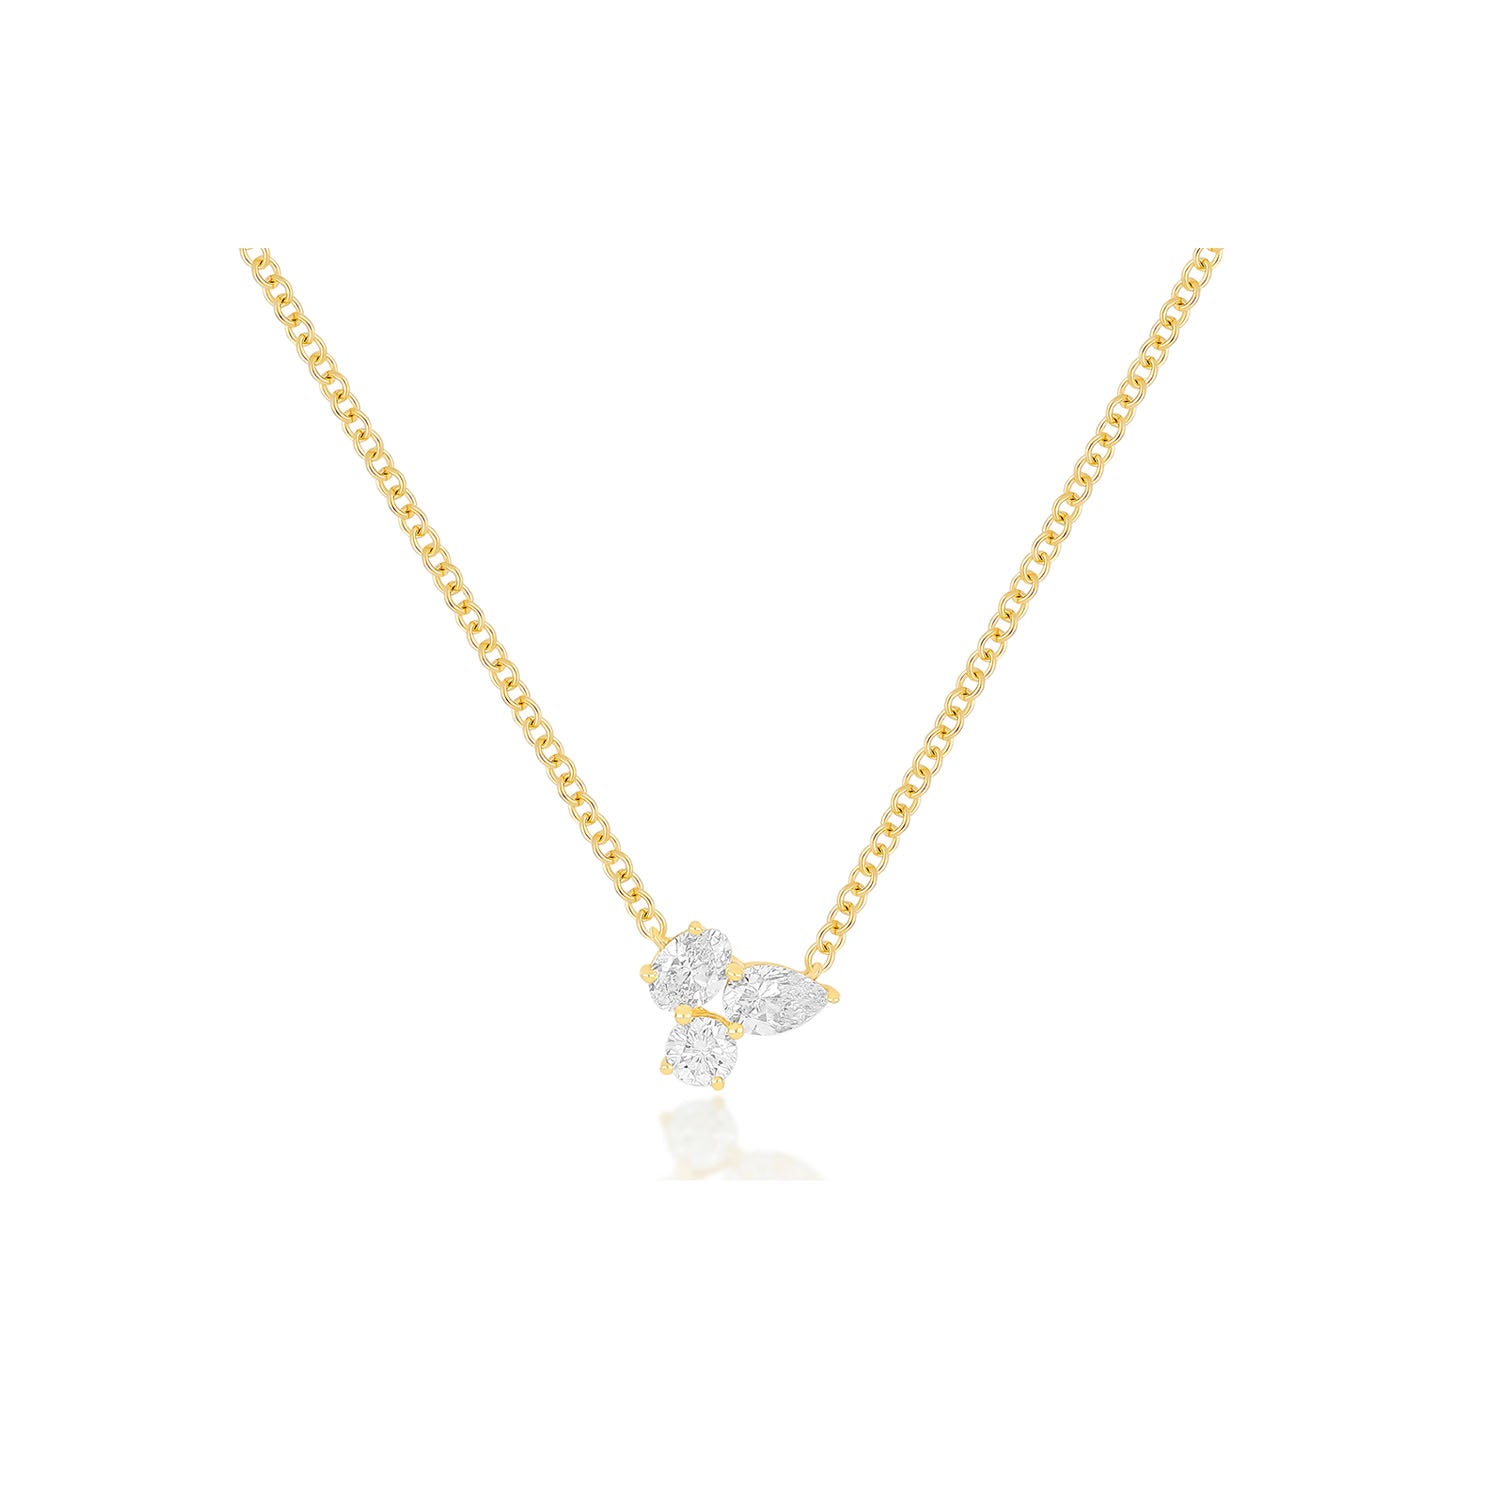 Triple Diamond Cluster Necklace in 14k yellow gold